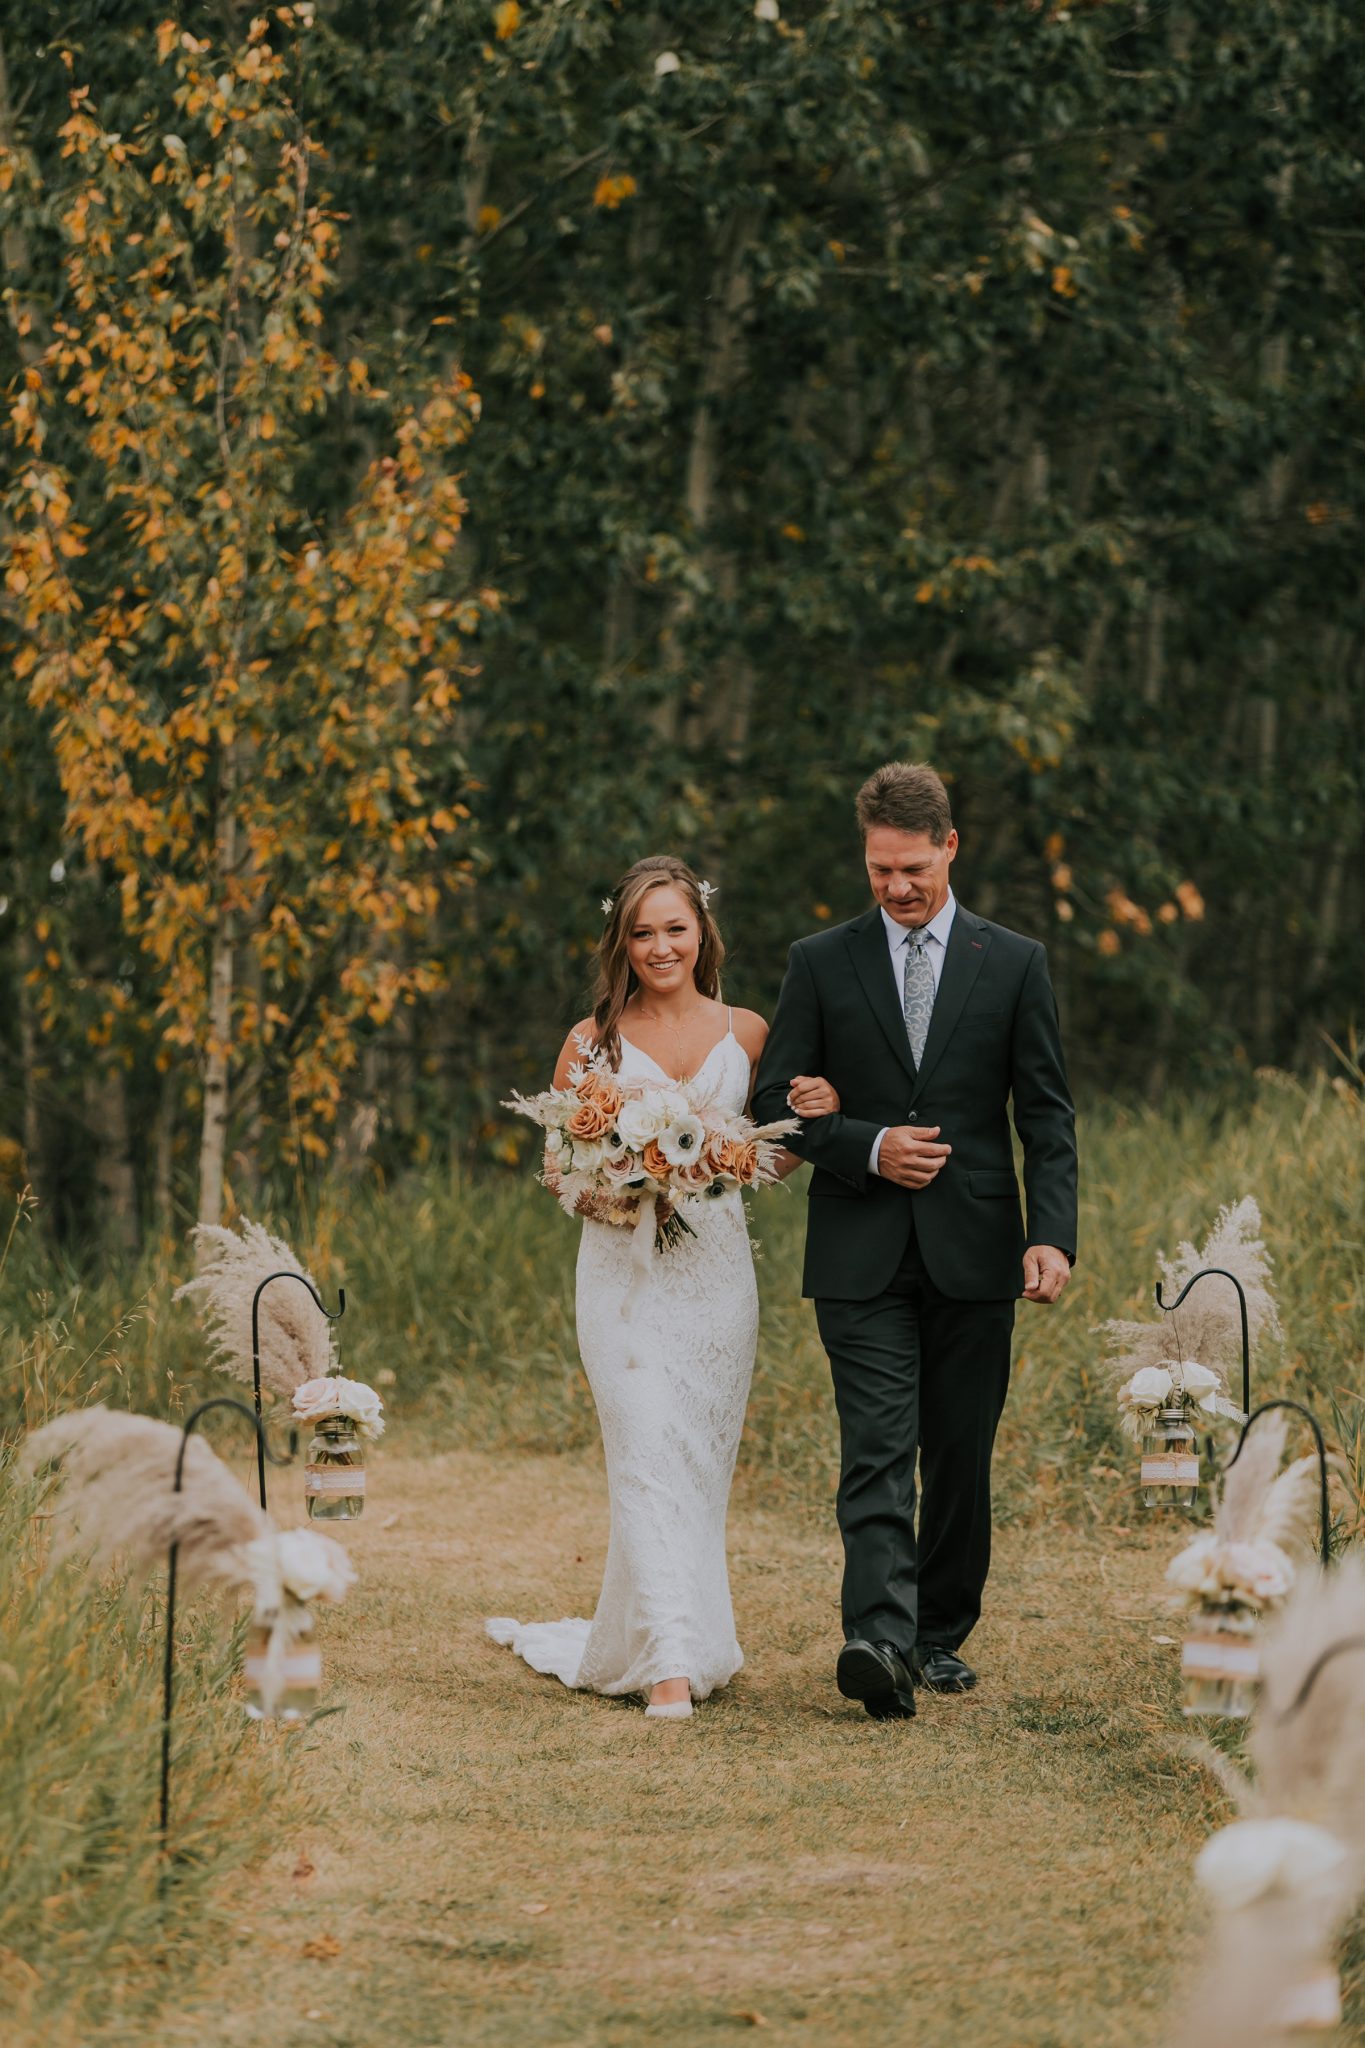 A Little Bit of Rain and Covid Restrictions weren't about to Slow This Couple Down! Featured on Brontë Bride, fall wedding, wedding ceremony inspiration